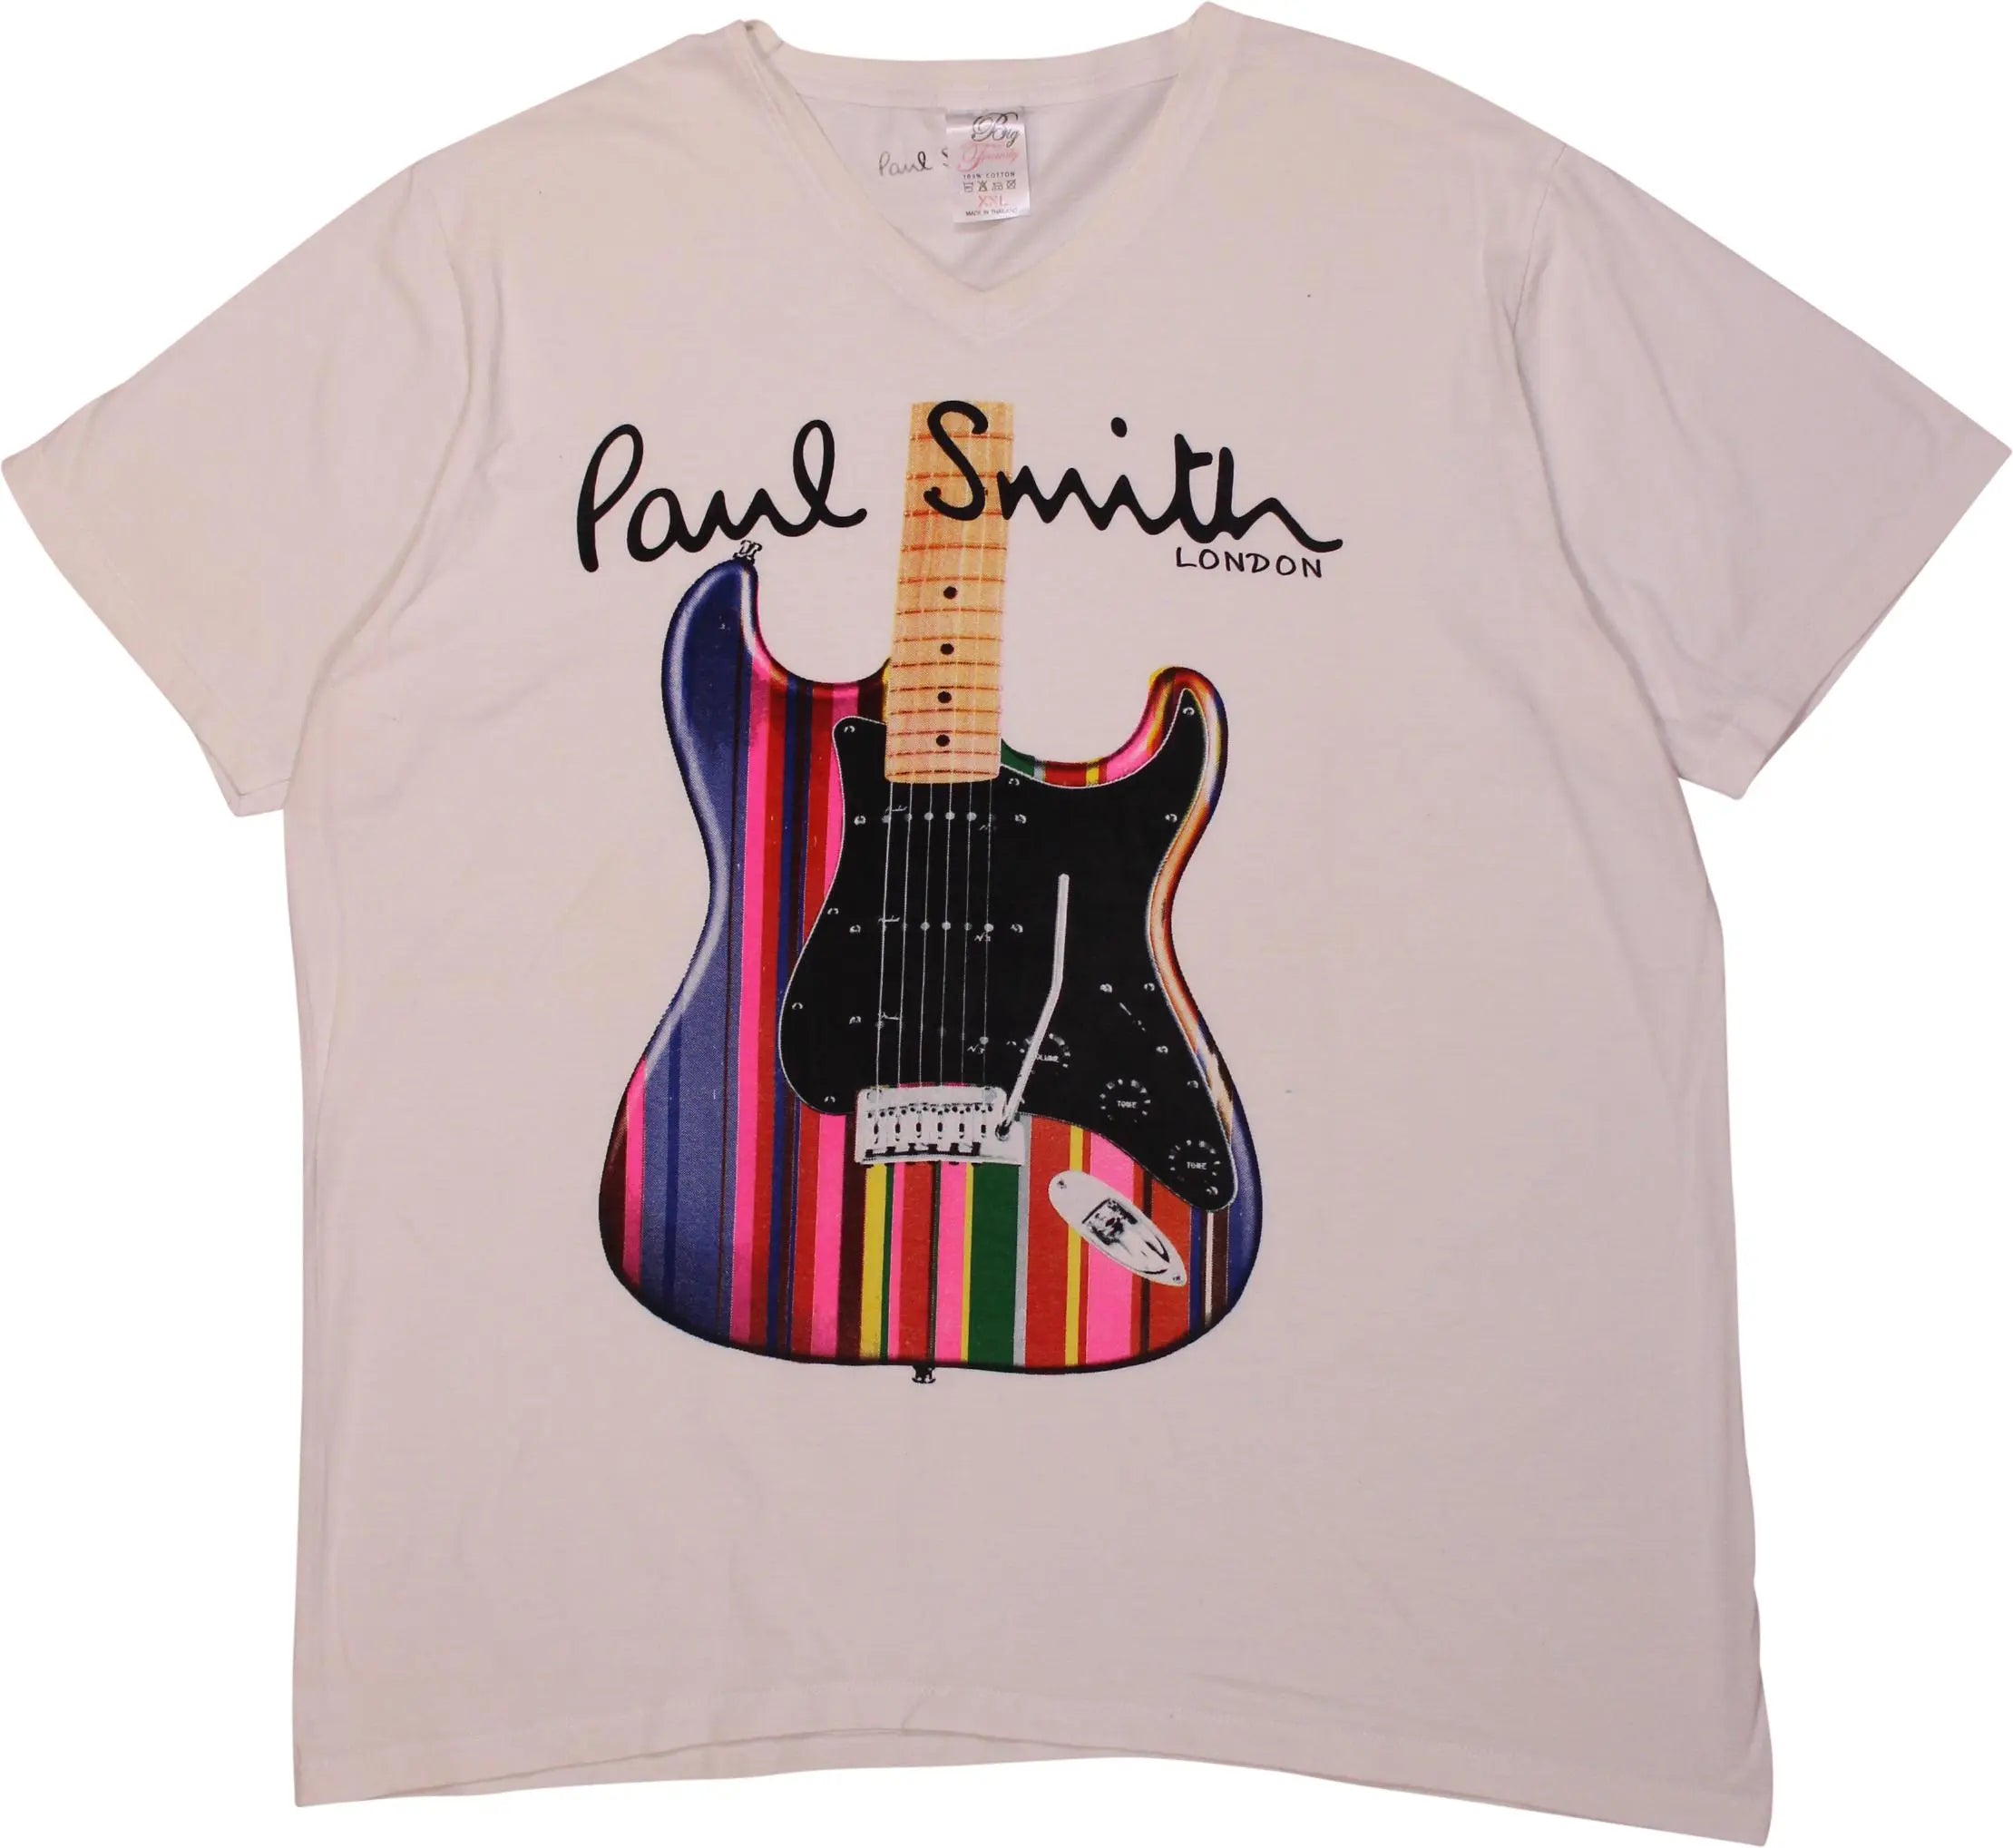 Big Family - Paul Smith London T-Shirt- ThriftTale.com - Vintage and second handclothing